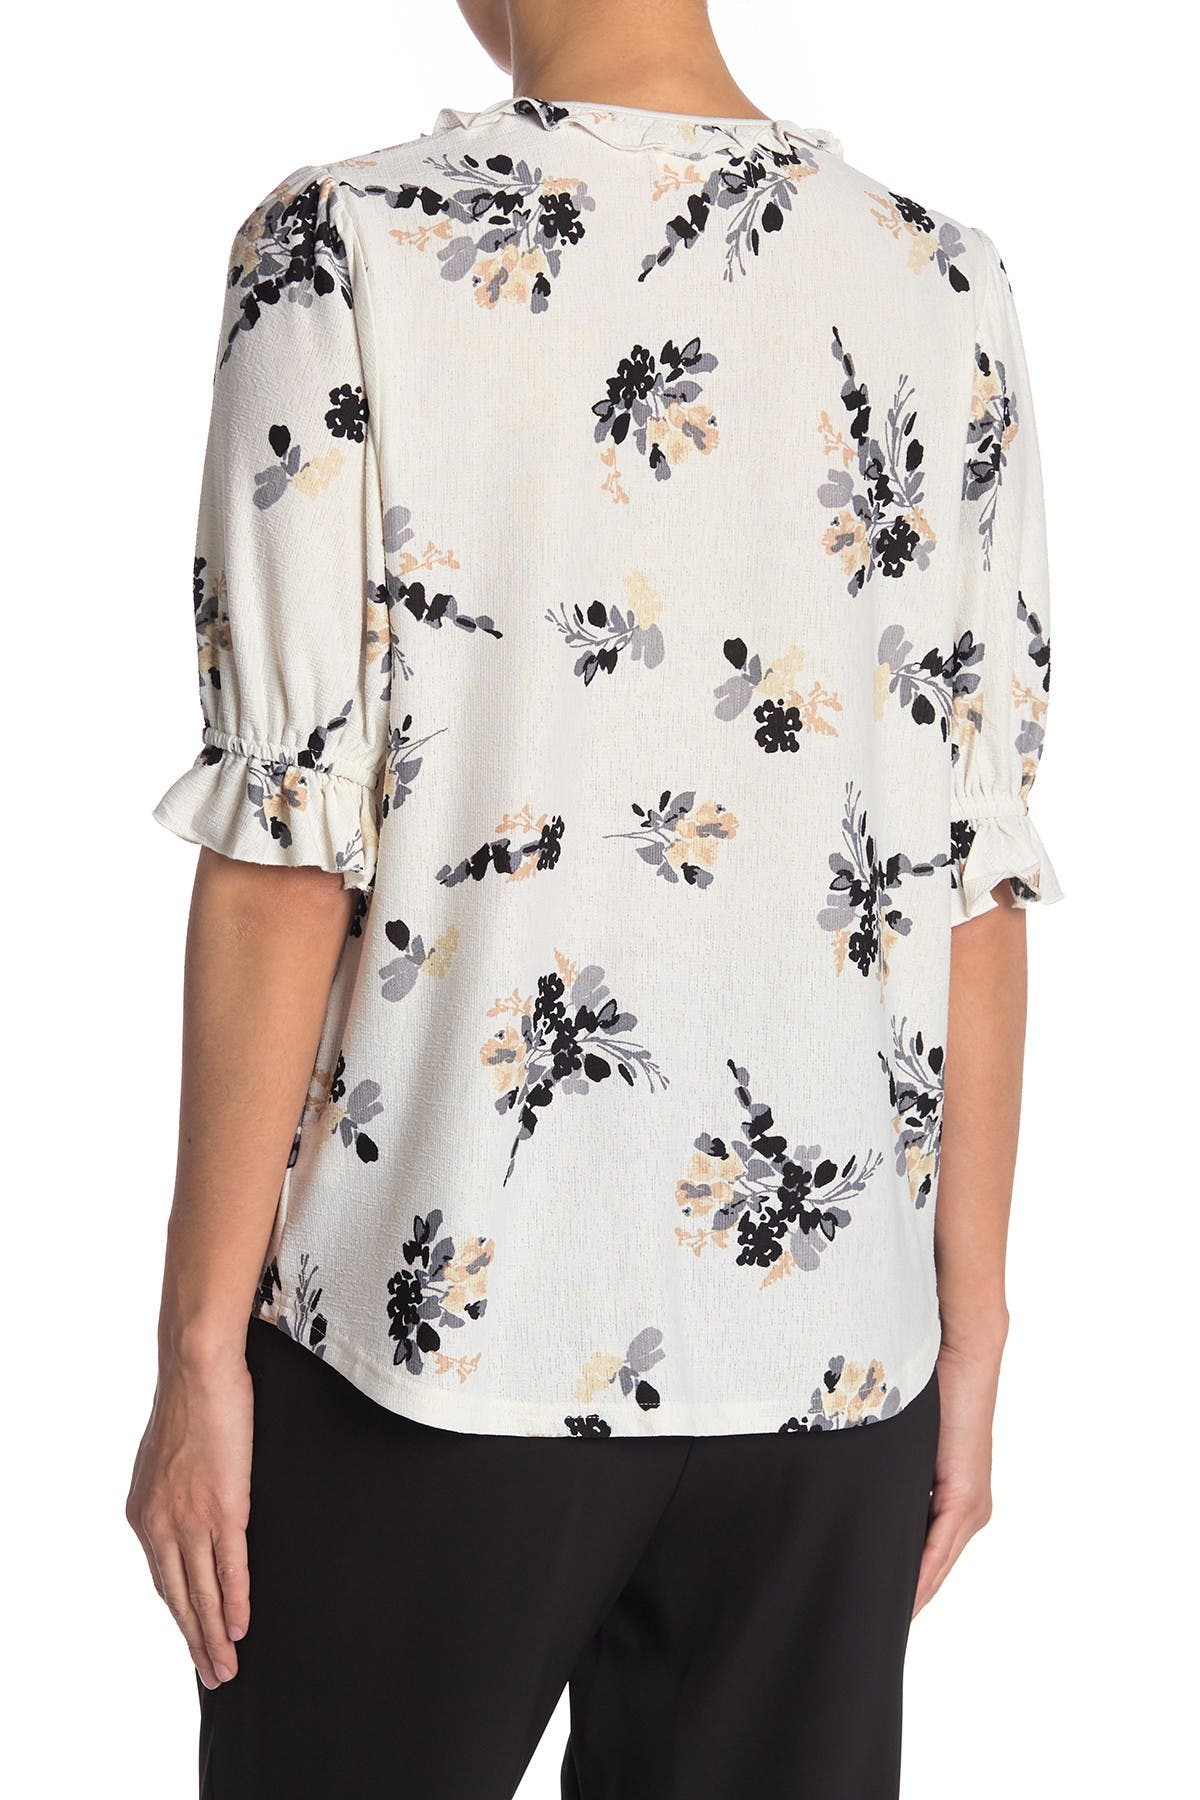 Melloday Printed Ruffle Sleeve Knit Blouse In Ivory Blk Grey Flrl